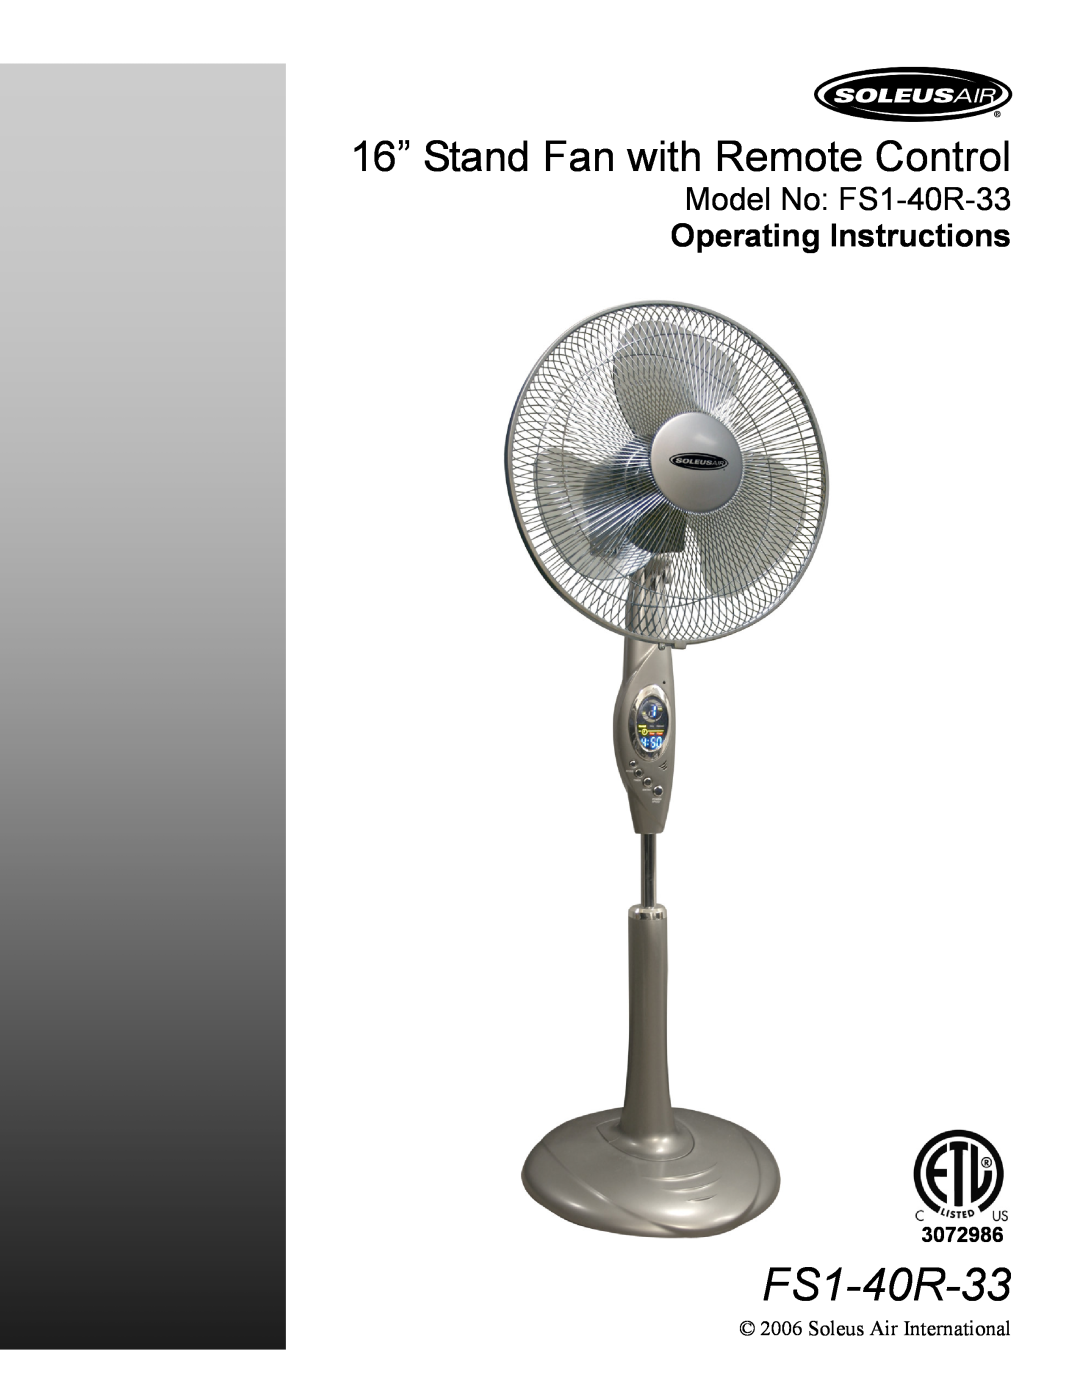 Soleus Air manual 16” Stand Fan with Remote Control, Model No FS1-40R-33 Operating Instructions 